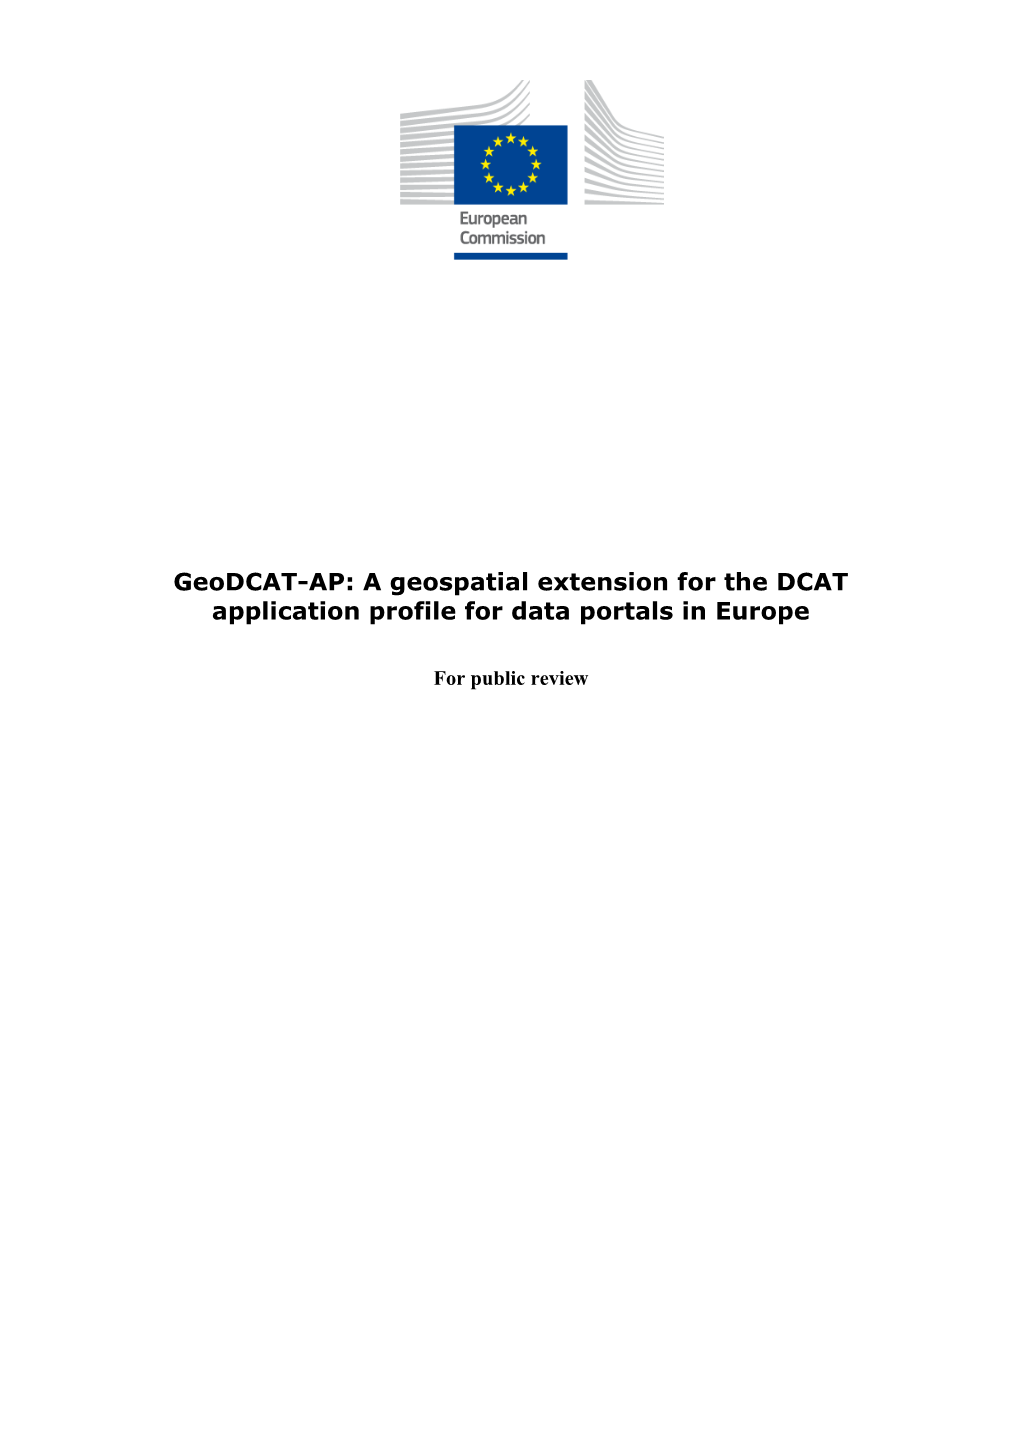 Geodcat-AP: a Geospatial Extension for the DCAT Application Profile for Data Portals in Europe